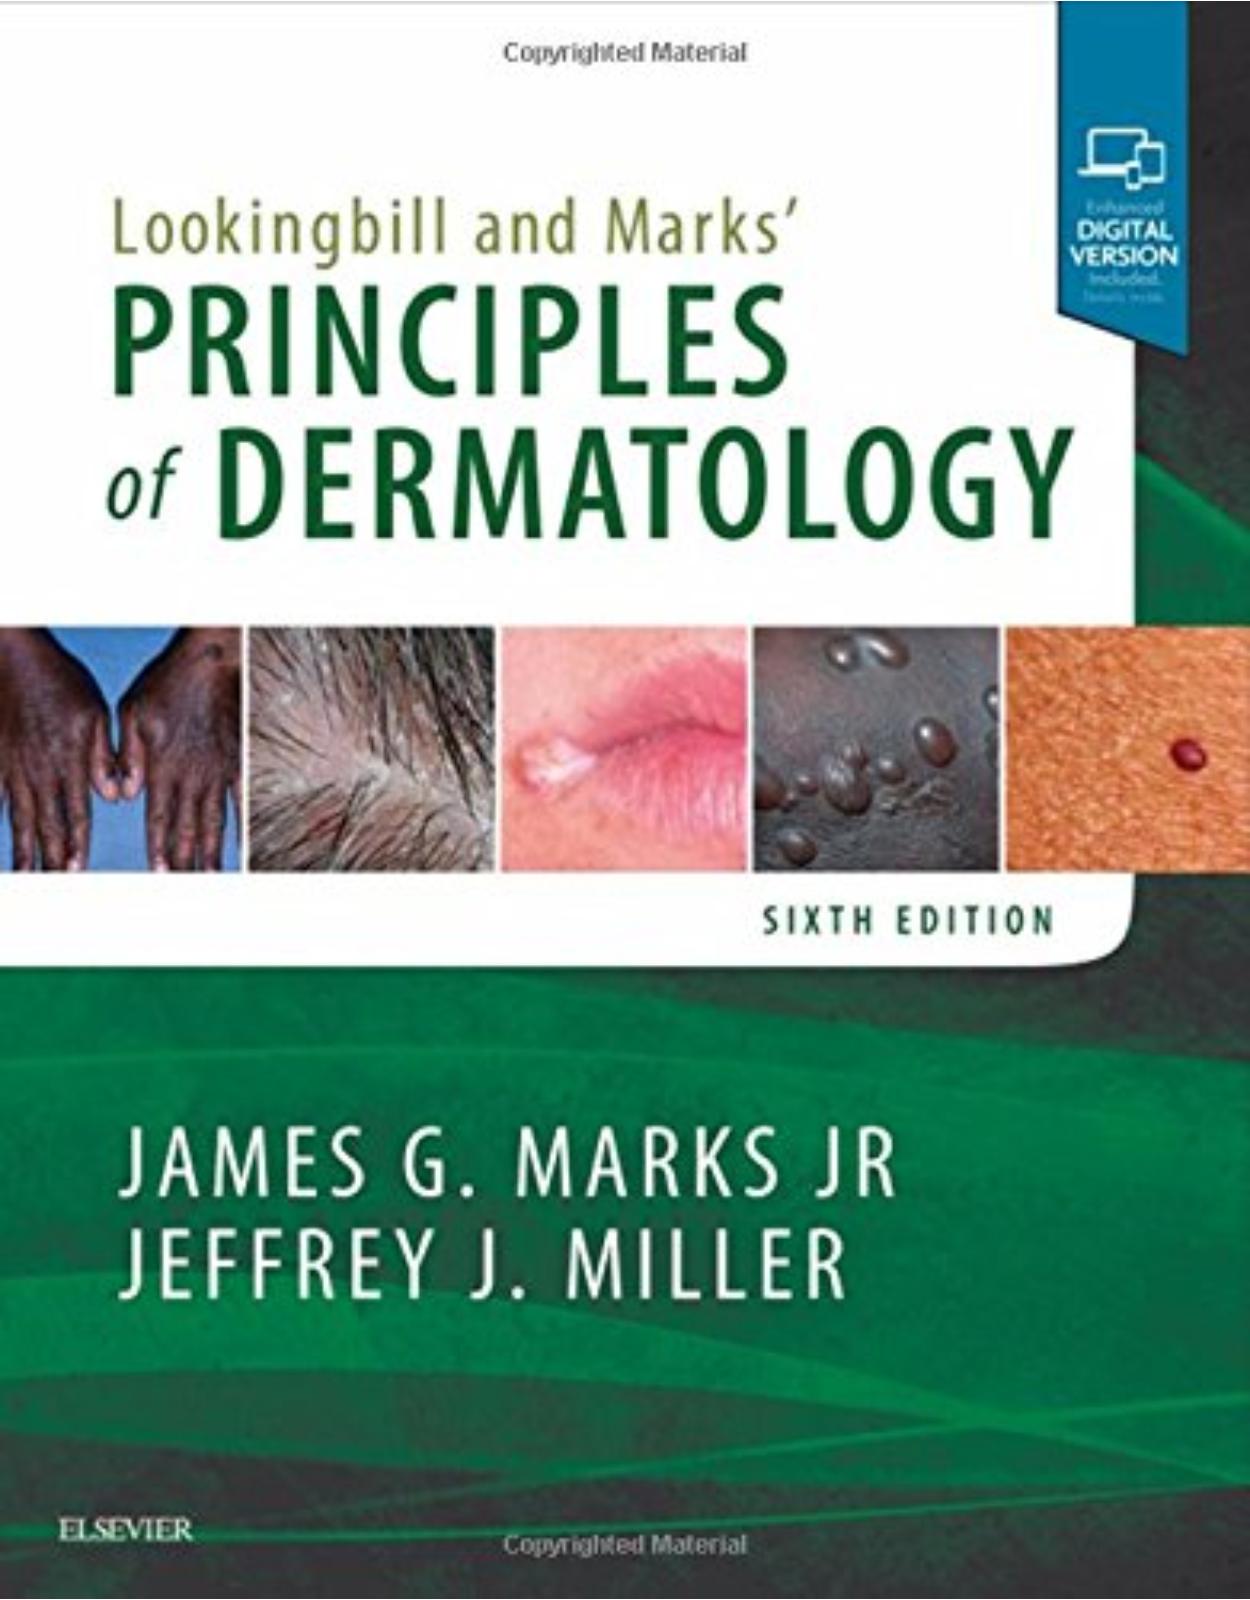 Lookingbill and Marks’ Principles of Dermatology, 6th Edition